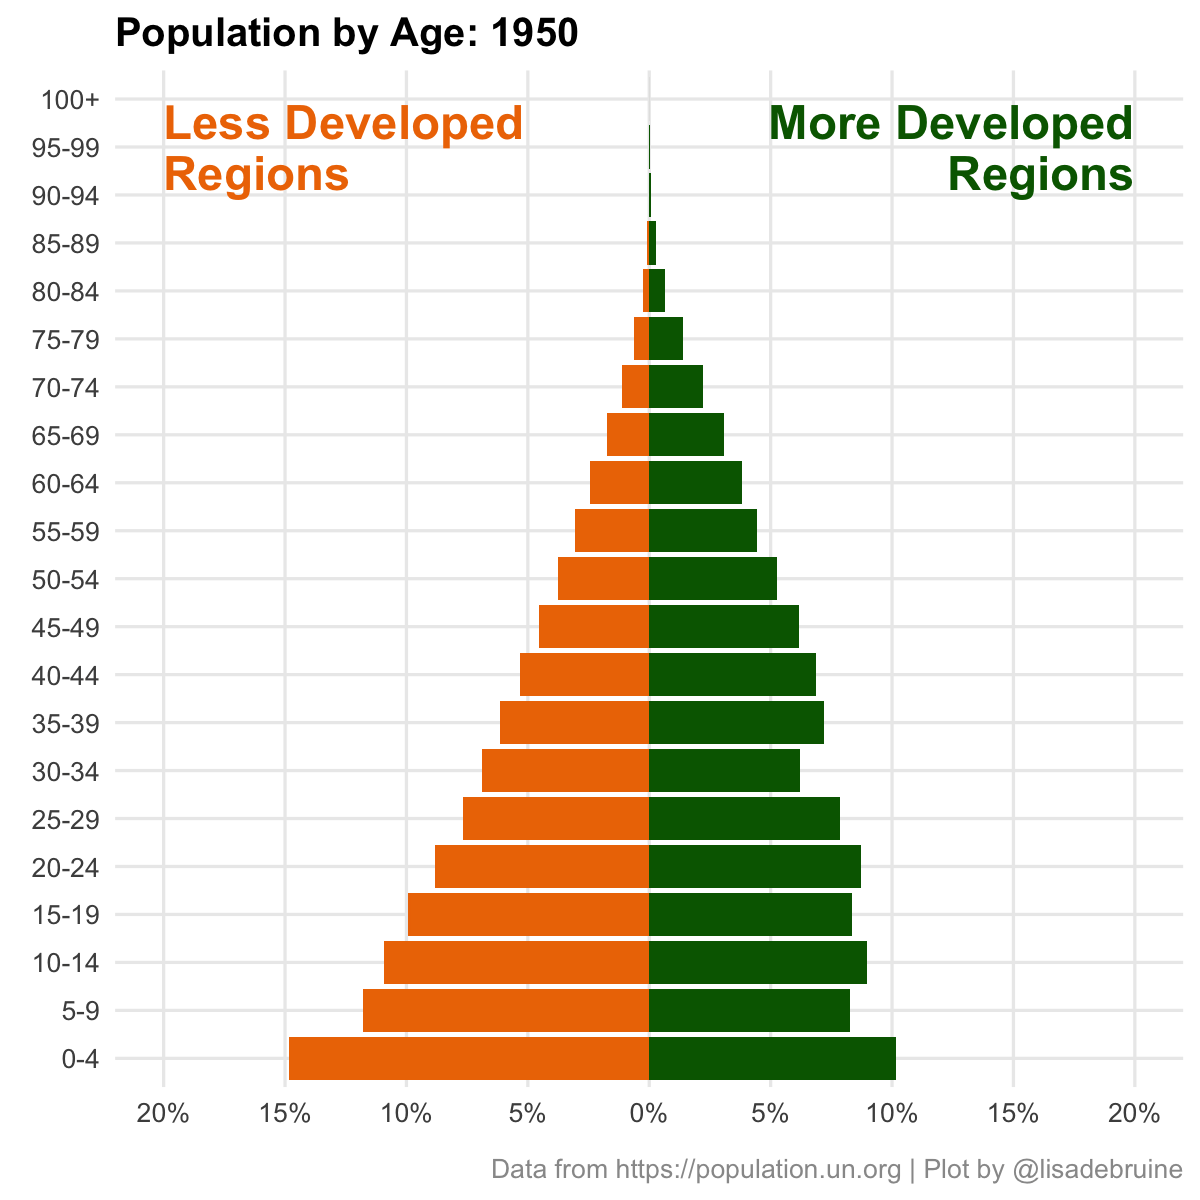 Population by age group (from 0 to 100+ in 5-year intervals) for less-developed and more-developed UN regions. Animated across years from 1950 to 2100 (projections). In the 1900s, the plot was triangluar, which most of the population at younger ages, although this wwas more prominent in less-developed regions. As time goes on, the structure gets more rectangular, with about equal numbers at all age groups until the very elderly.